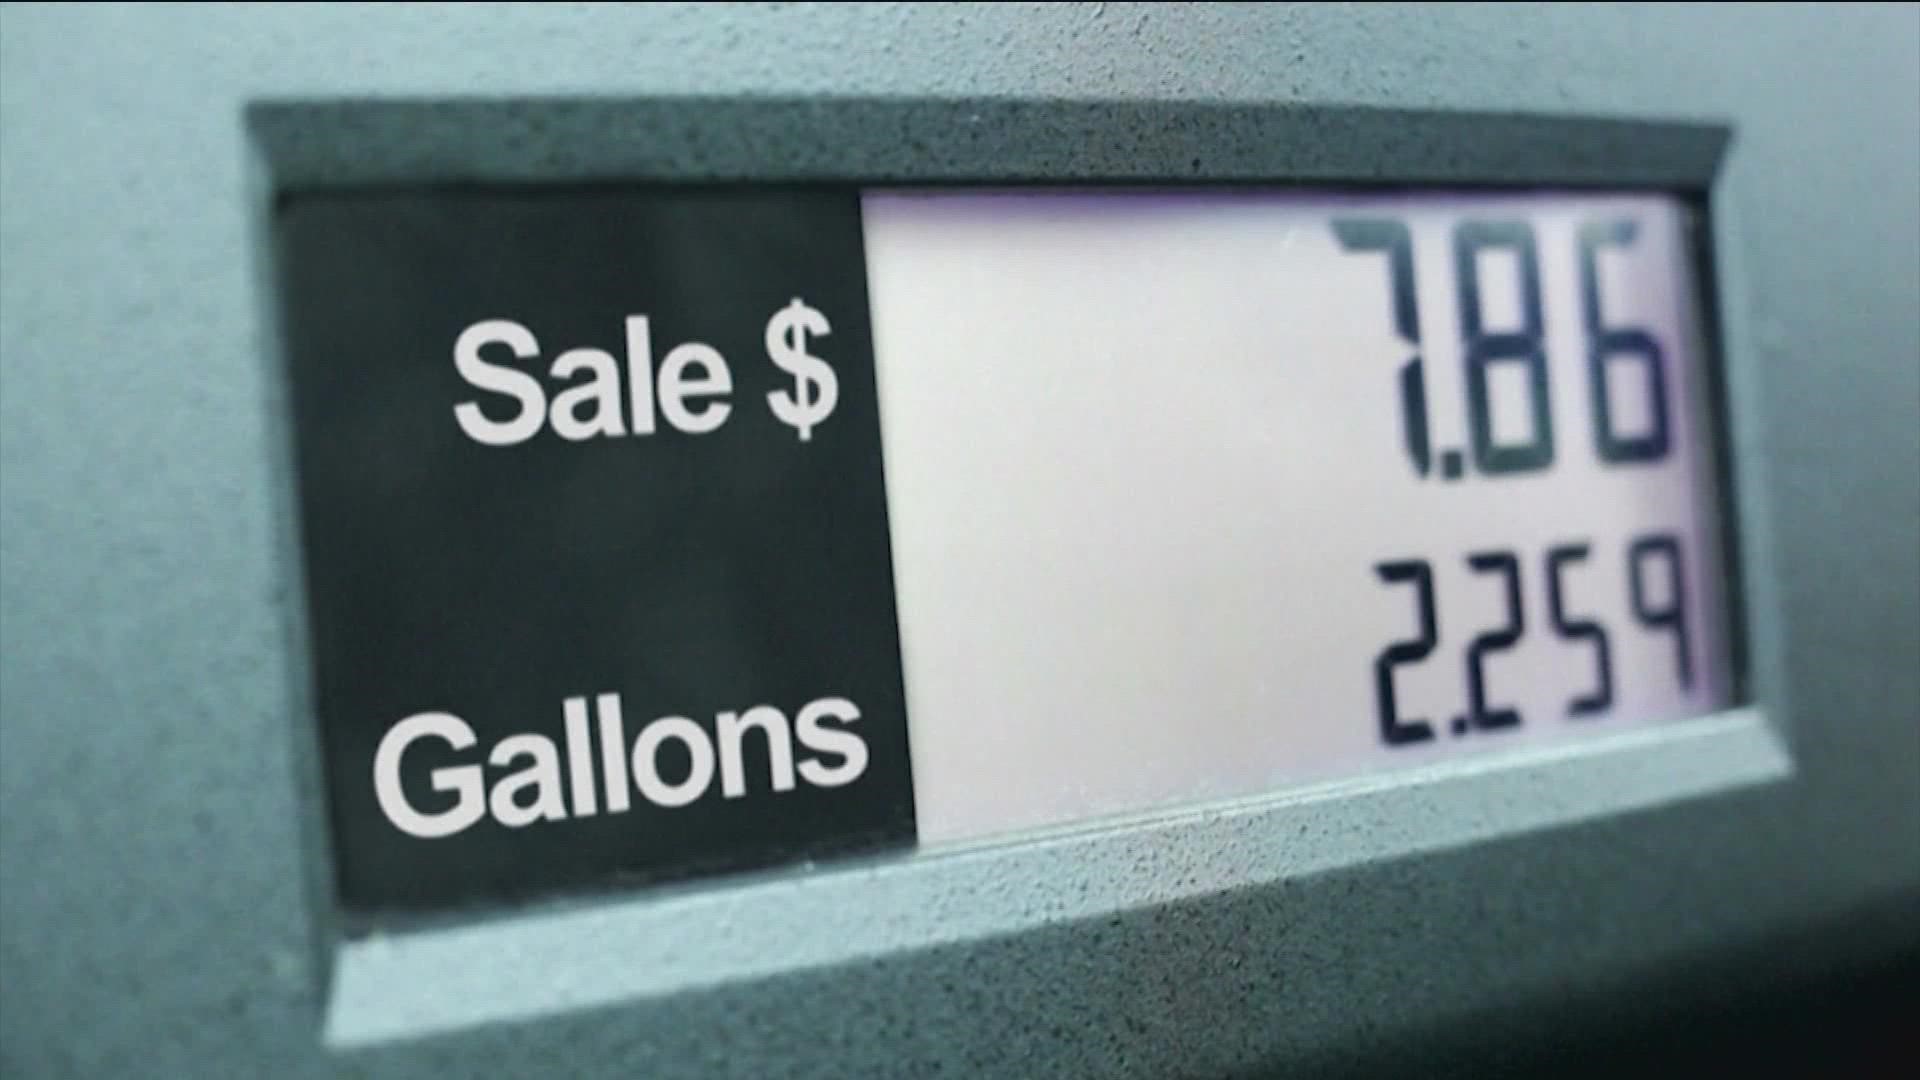 AAA says waiting too long to put gas in your tank could cost you more in the long run.